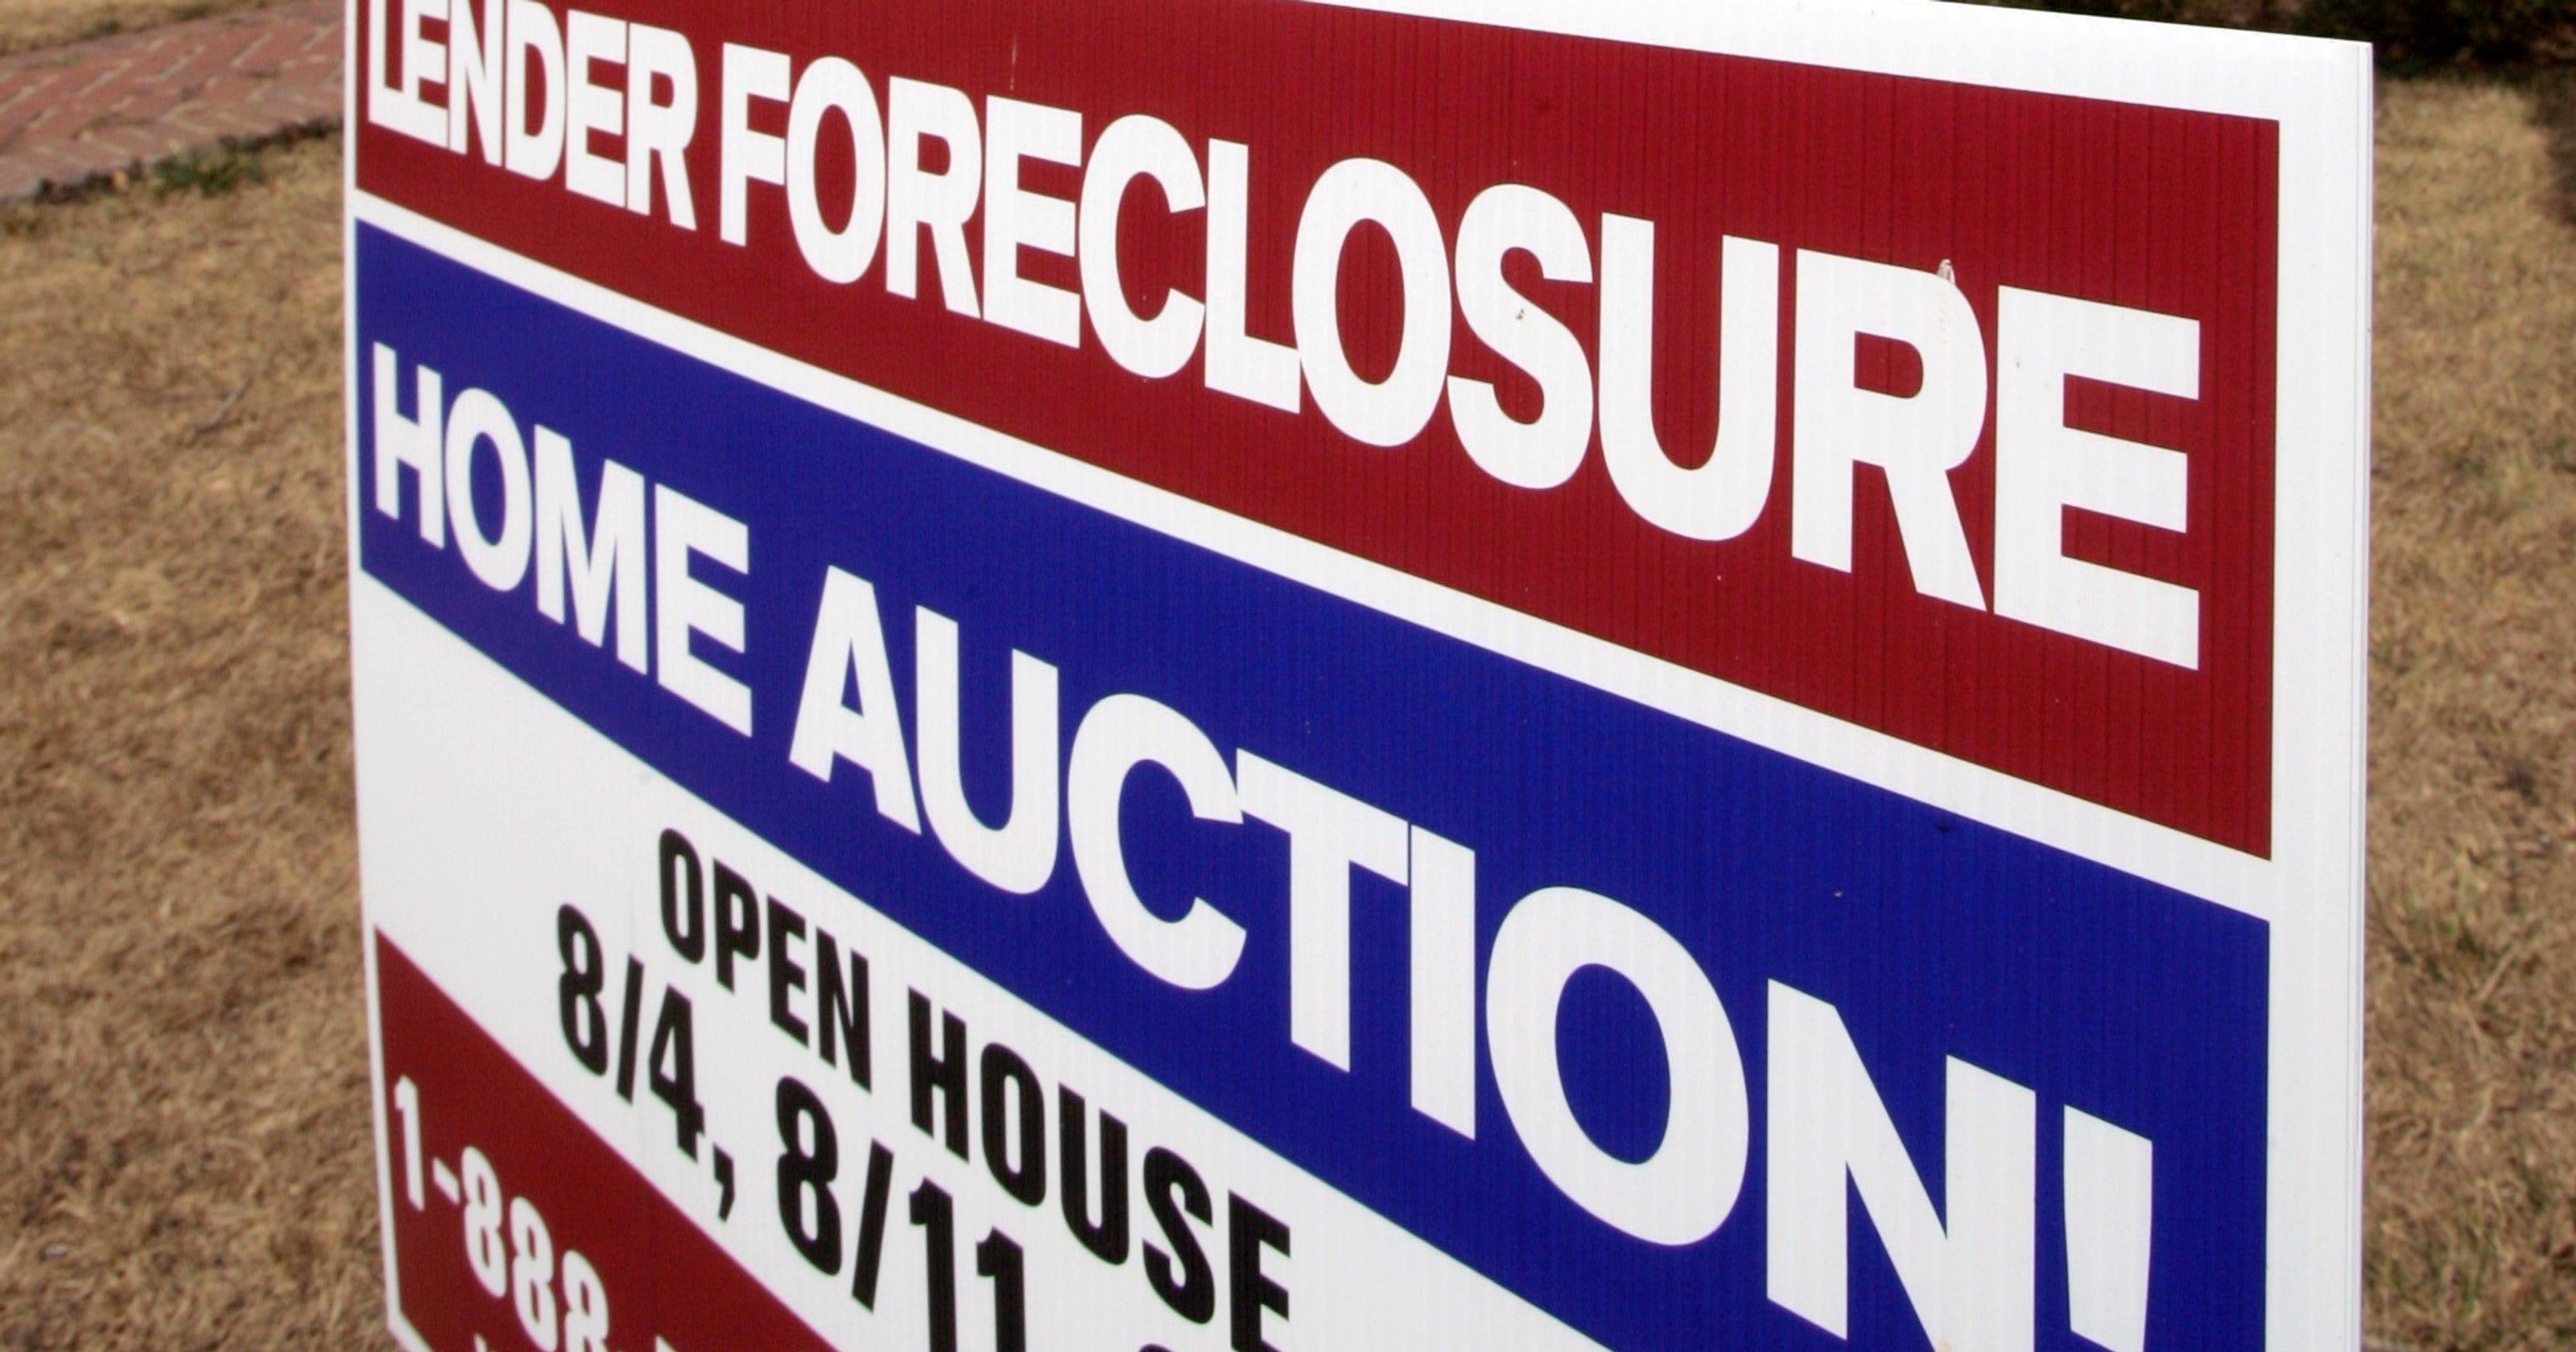 Foreclosure.com Logo - Feds crack down on foreclosure auction scams